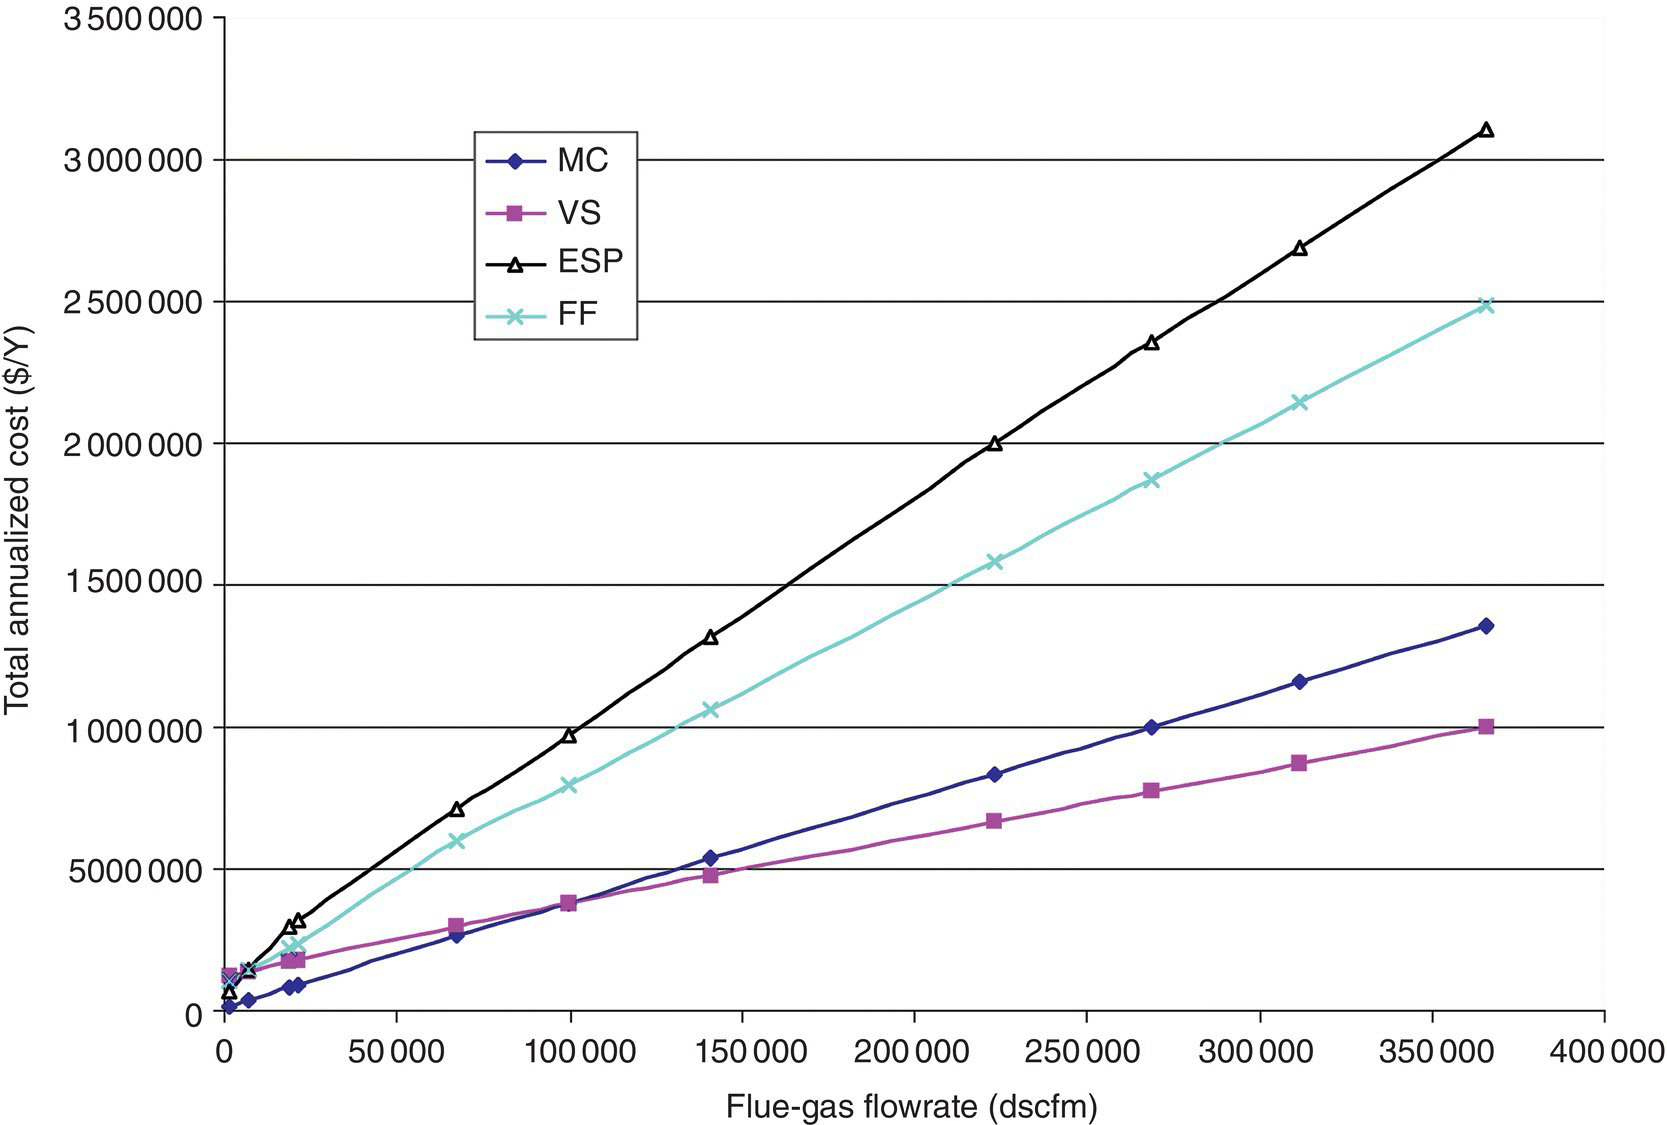 Graph of flue-gas flow rate vs. annualized control cost for PM displaying four ascending curves for MC, VS, ESP, and FF.